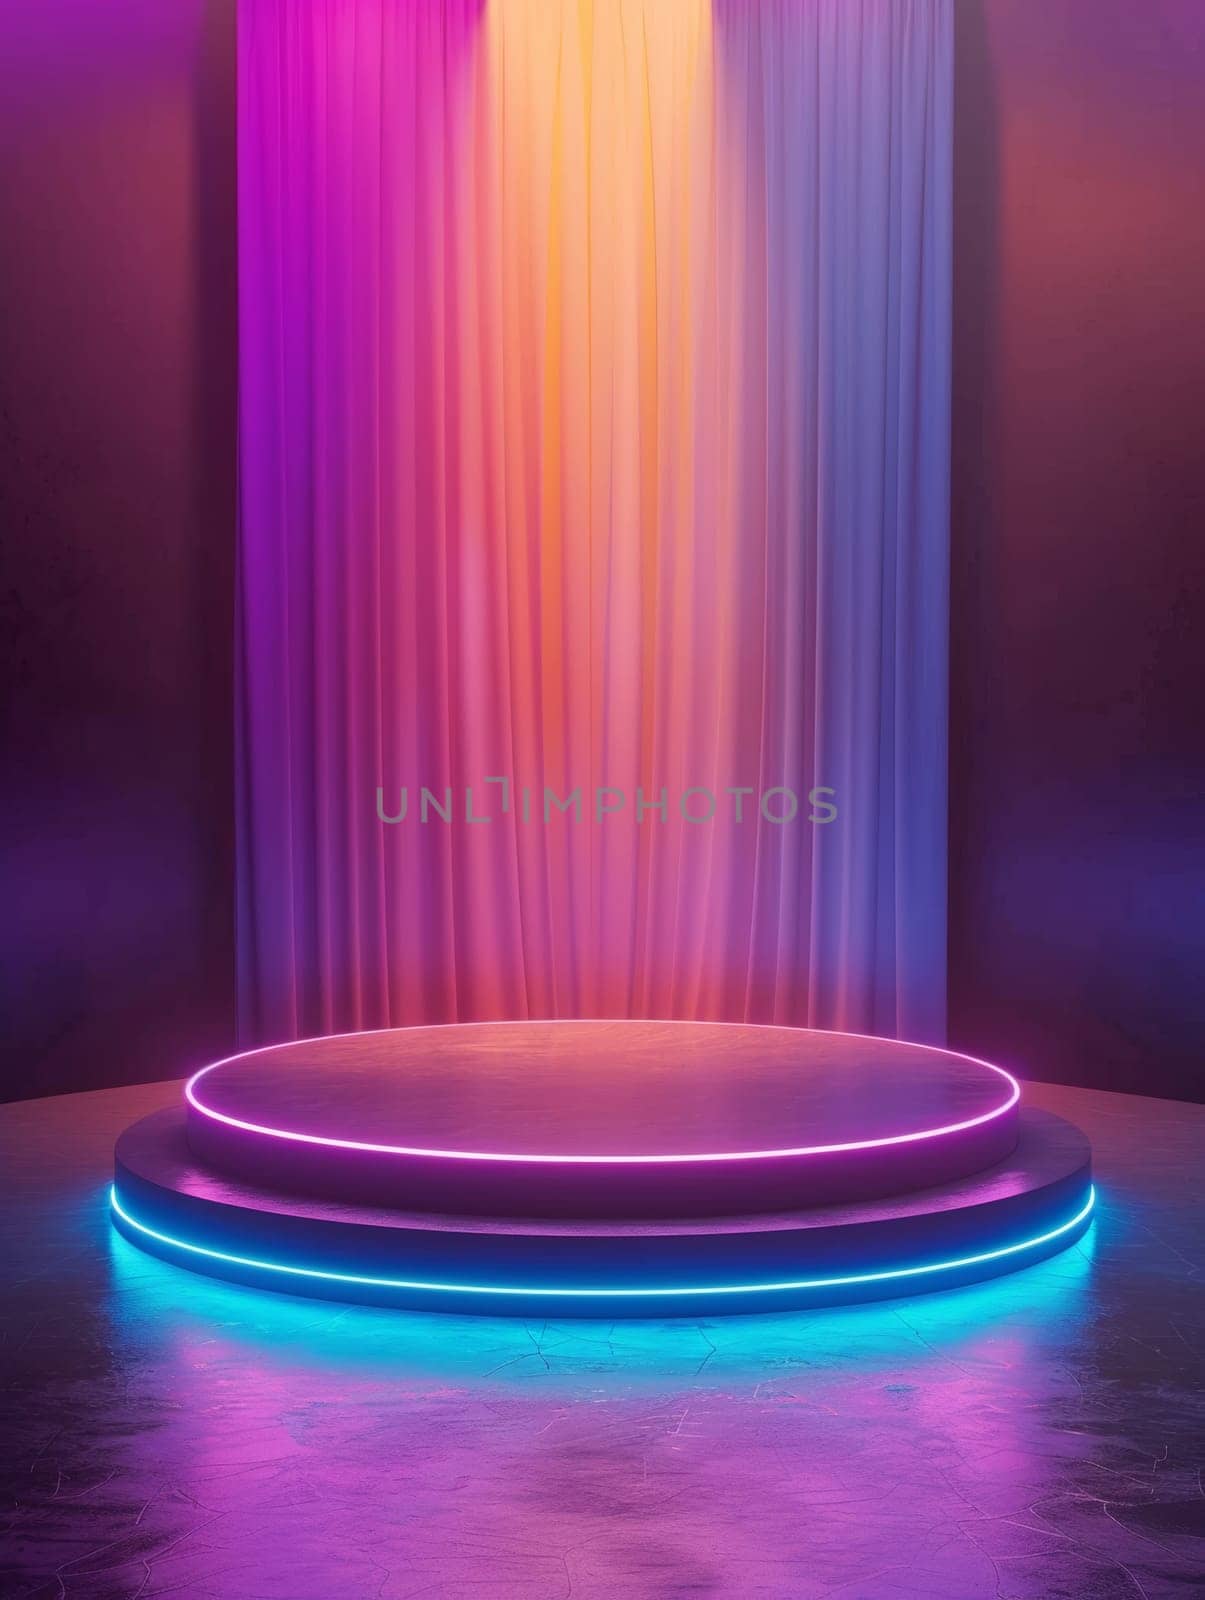 An illuminated circular dais, ringed with vibrant neon lighting, stands as a captivating platform for product display or presentation. by sfinks